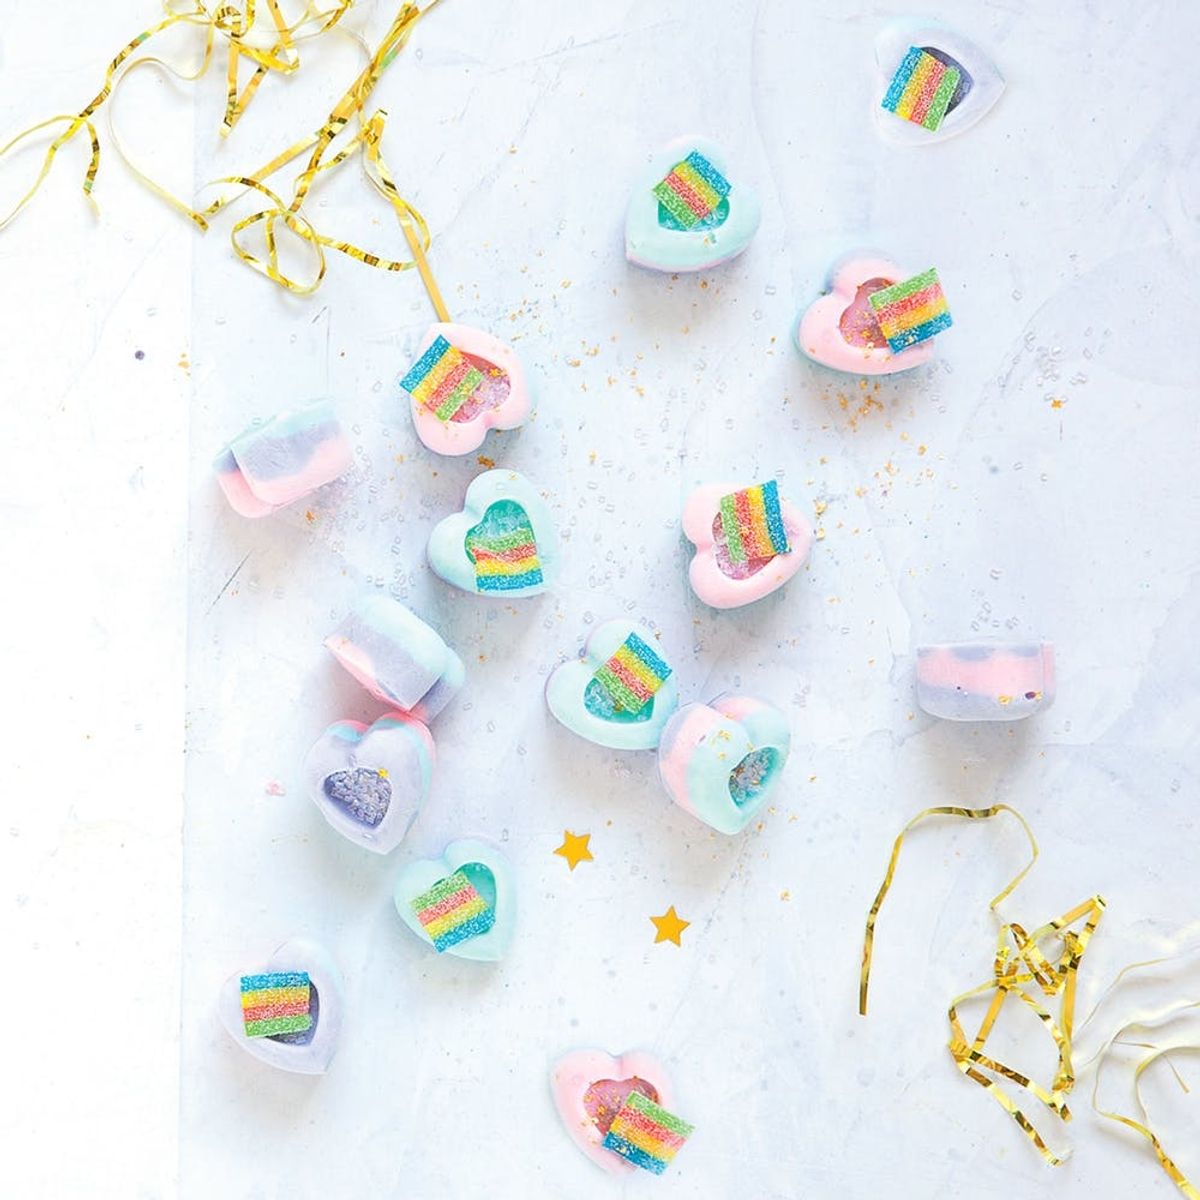 Hop on the Unicorn Food Trend With These Colorful Yogurt Bites